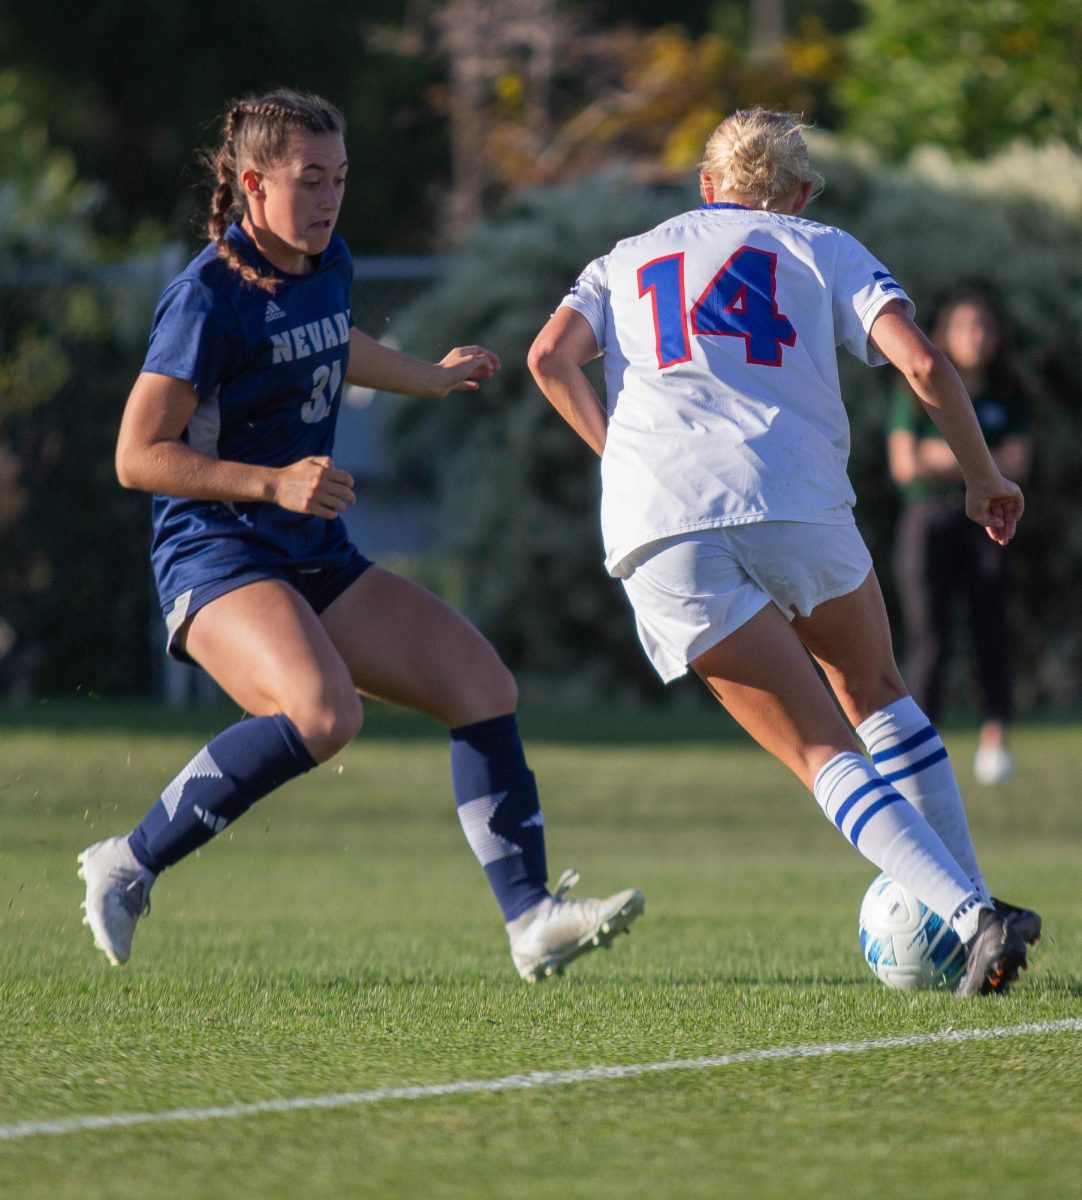 Katy Coffin (14) dribbles past University of Nevada player. Colorado State University won over Nevada with a final score of 2-1 on September 21.